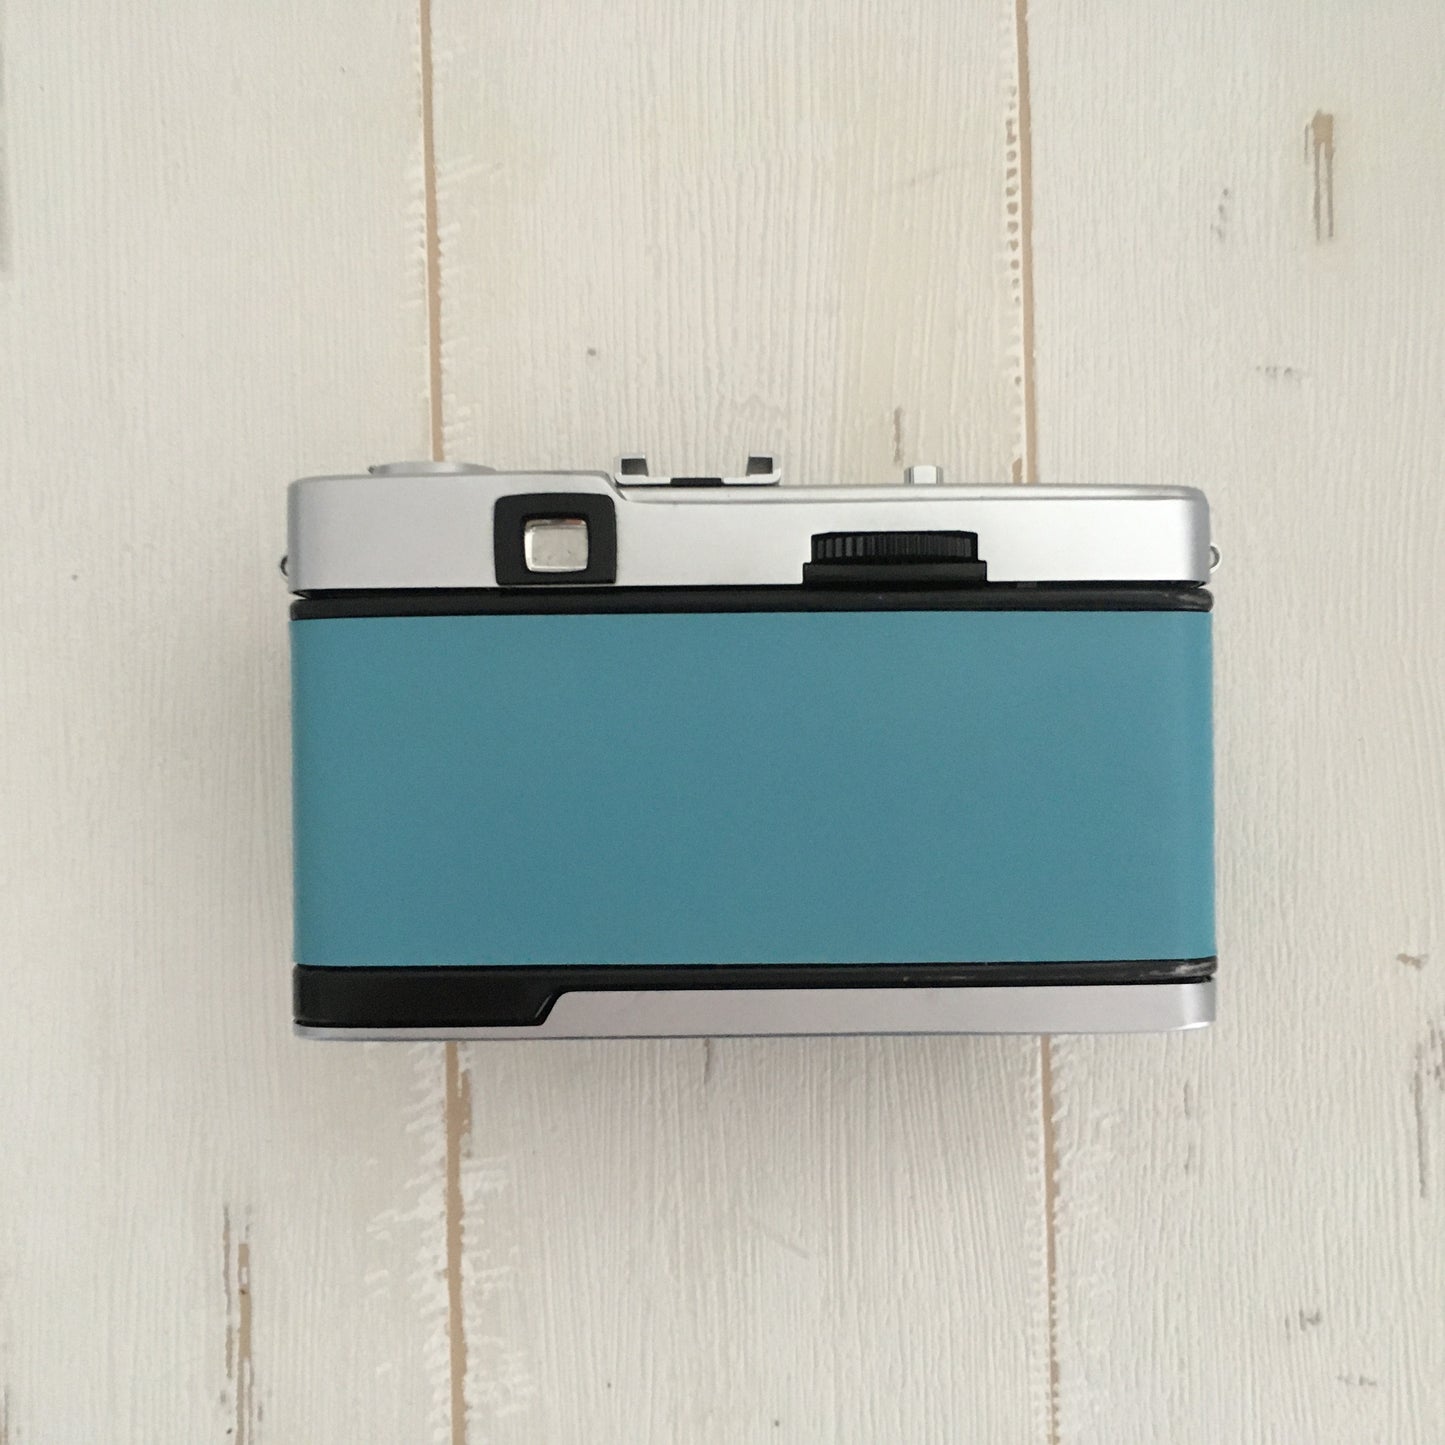 Olympus TRIP35  with saxe blue leather